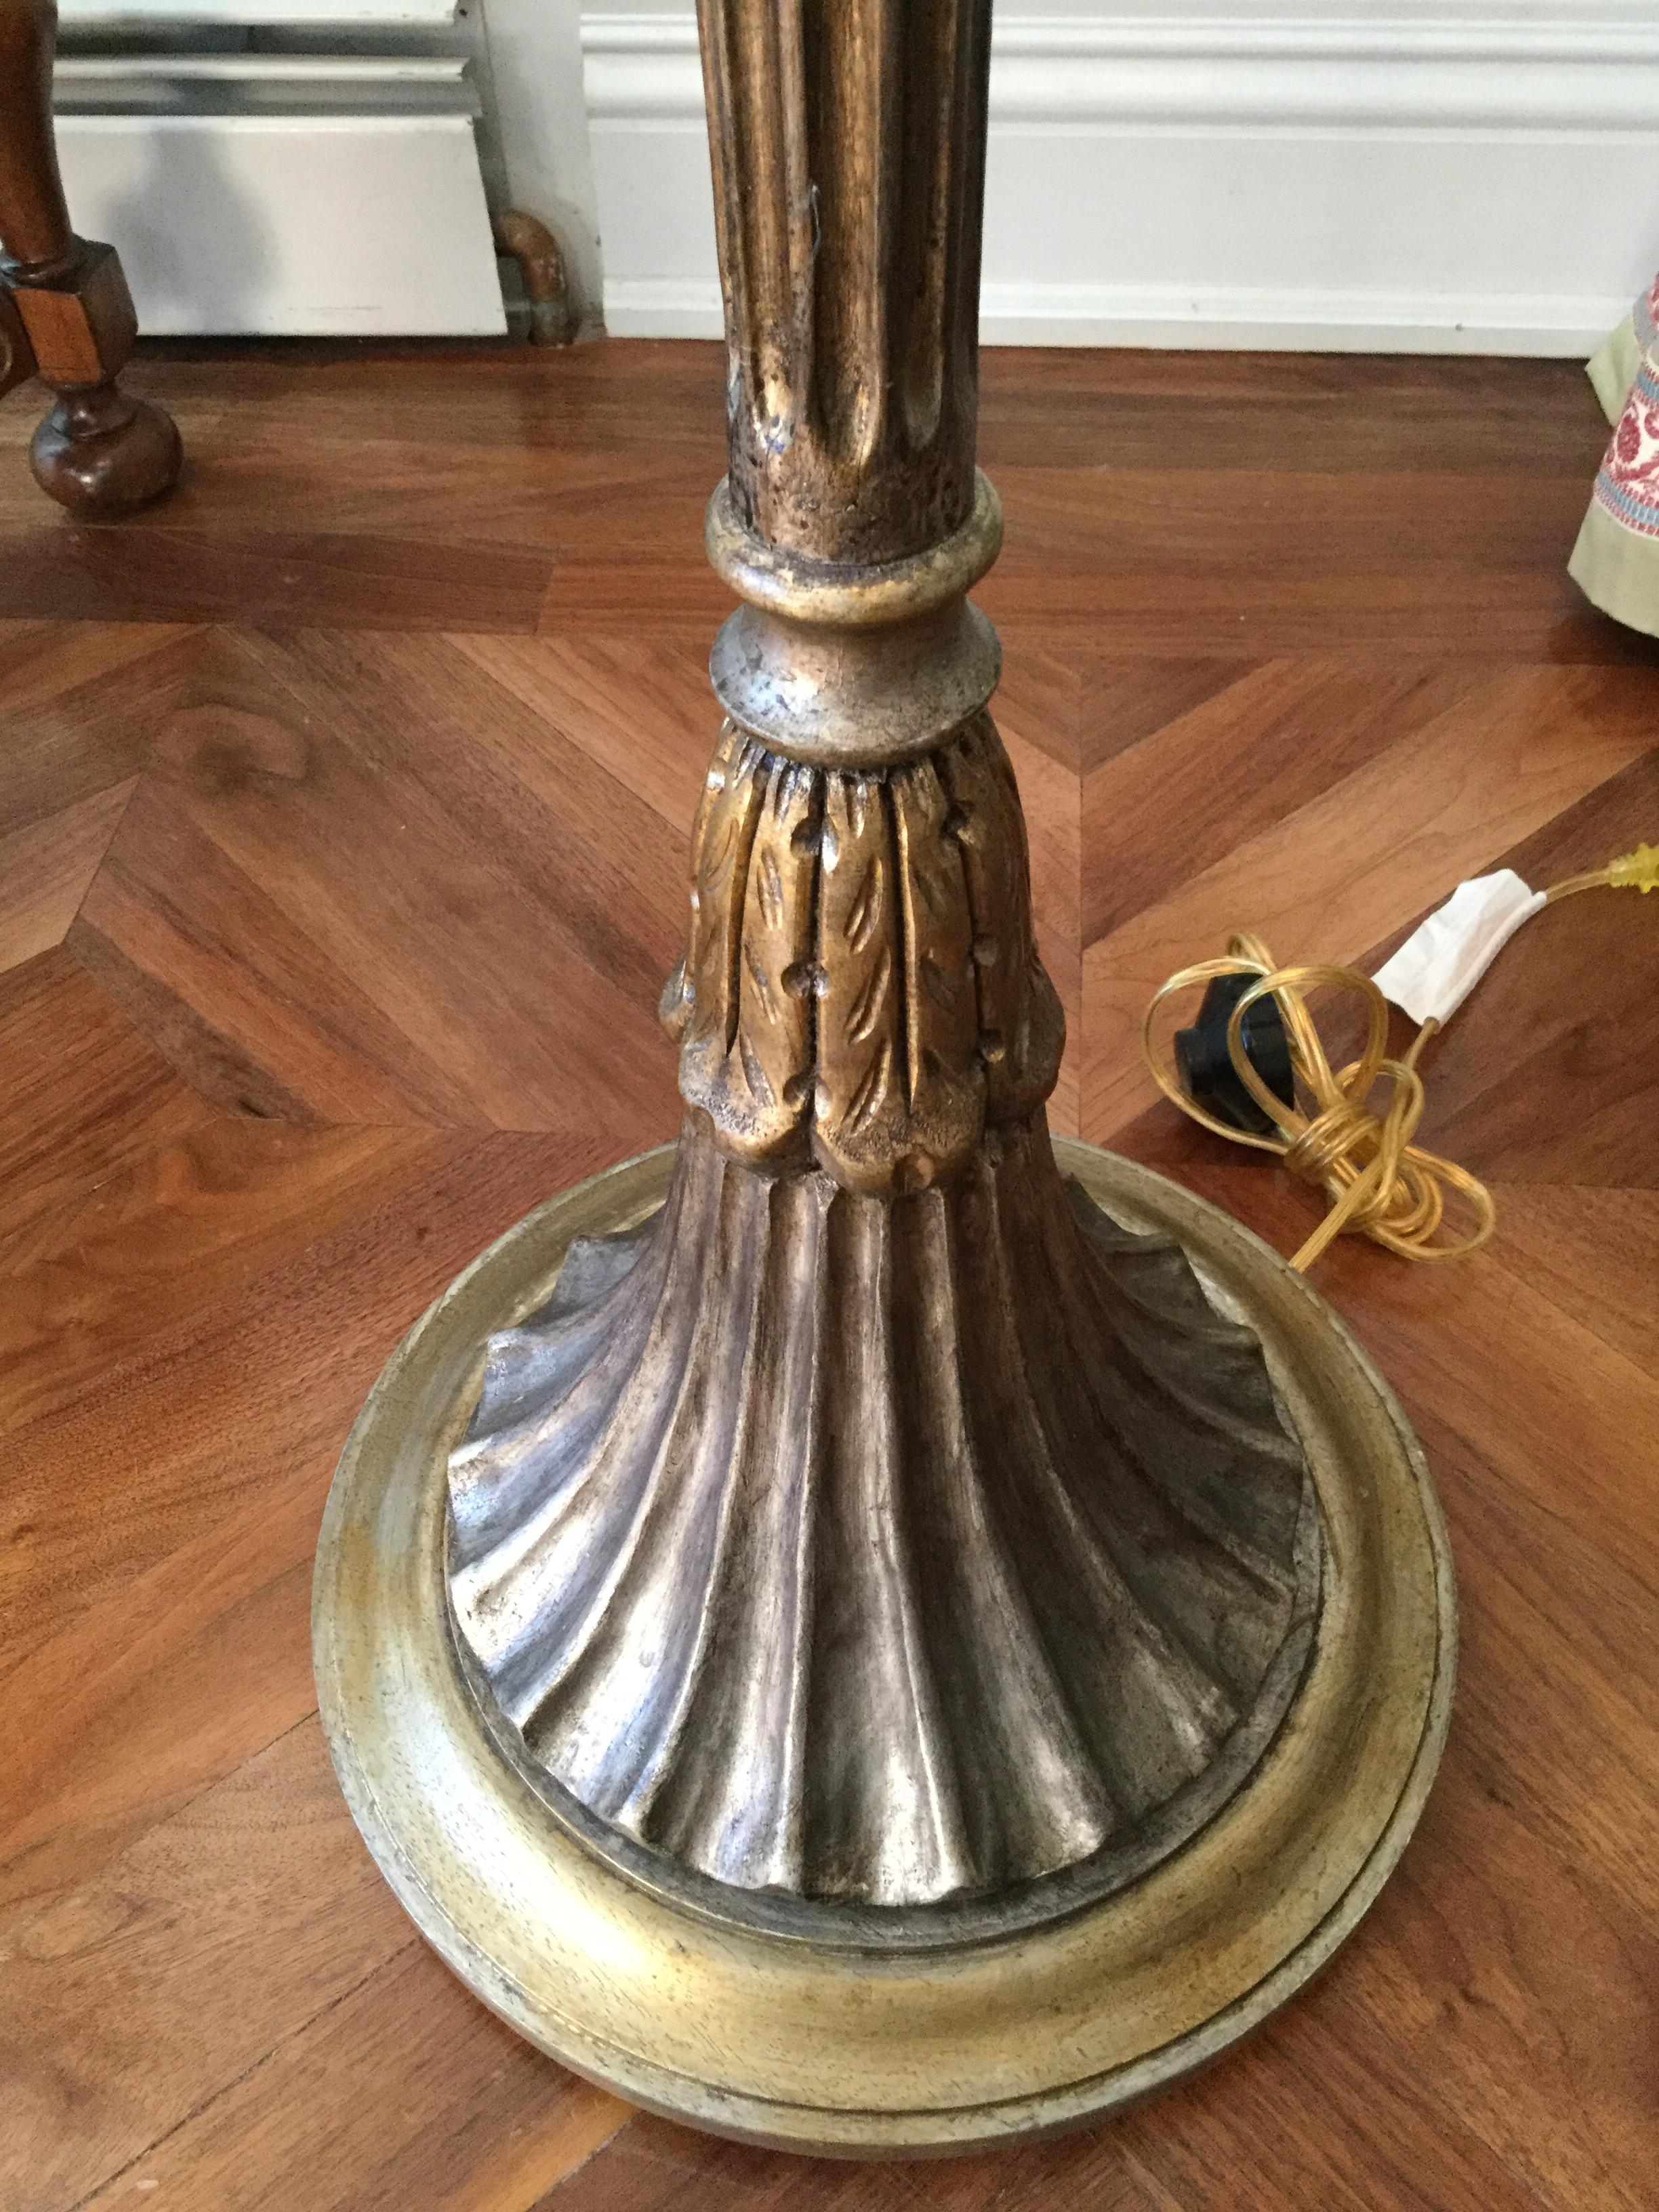 Made of wood, this elegant 4-arm floor lamp features shirred beige lampshades. The central lamp post has gold and silver overtones. The base is round and features acanthus leaves. The arms are made of metal and nicely chased. Mint condition.